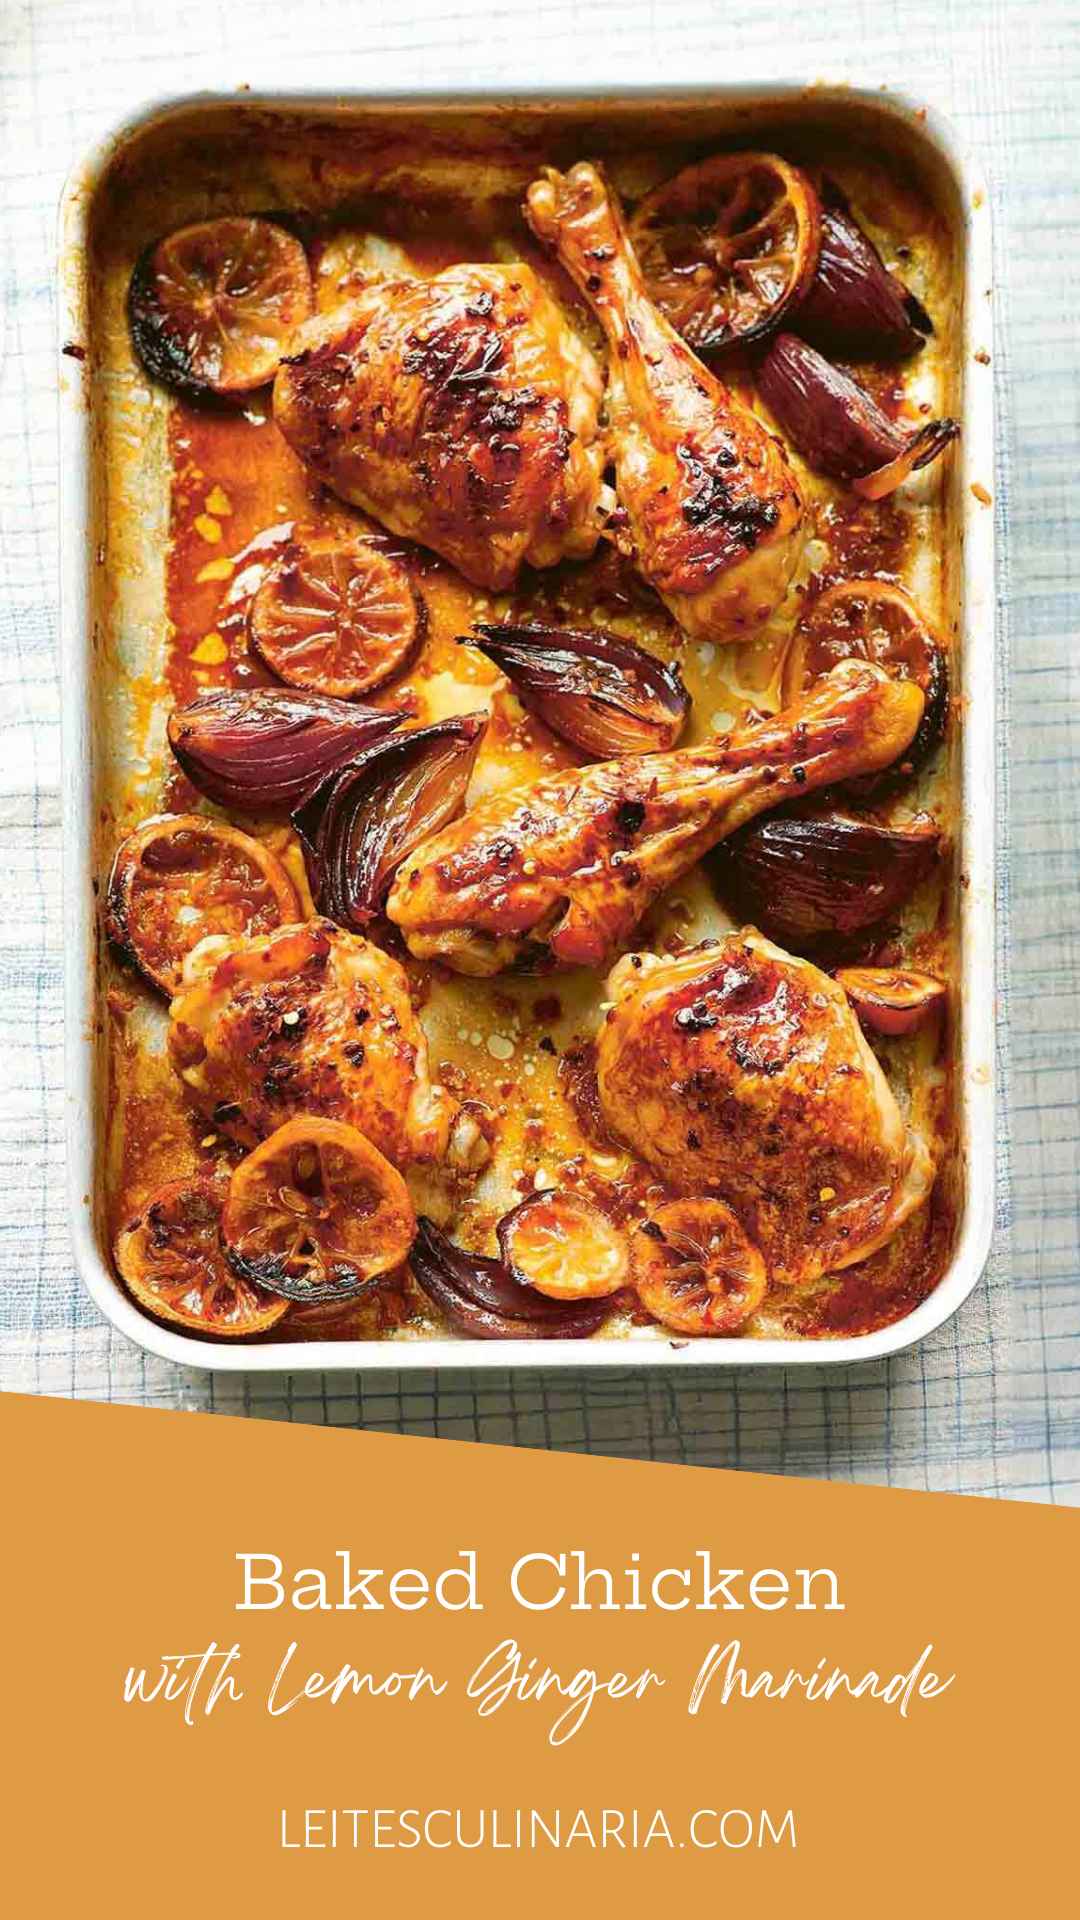 Baked chicken pieces in a baking dish with red onion wedges and lemon slices.